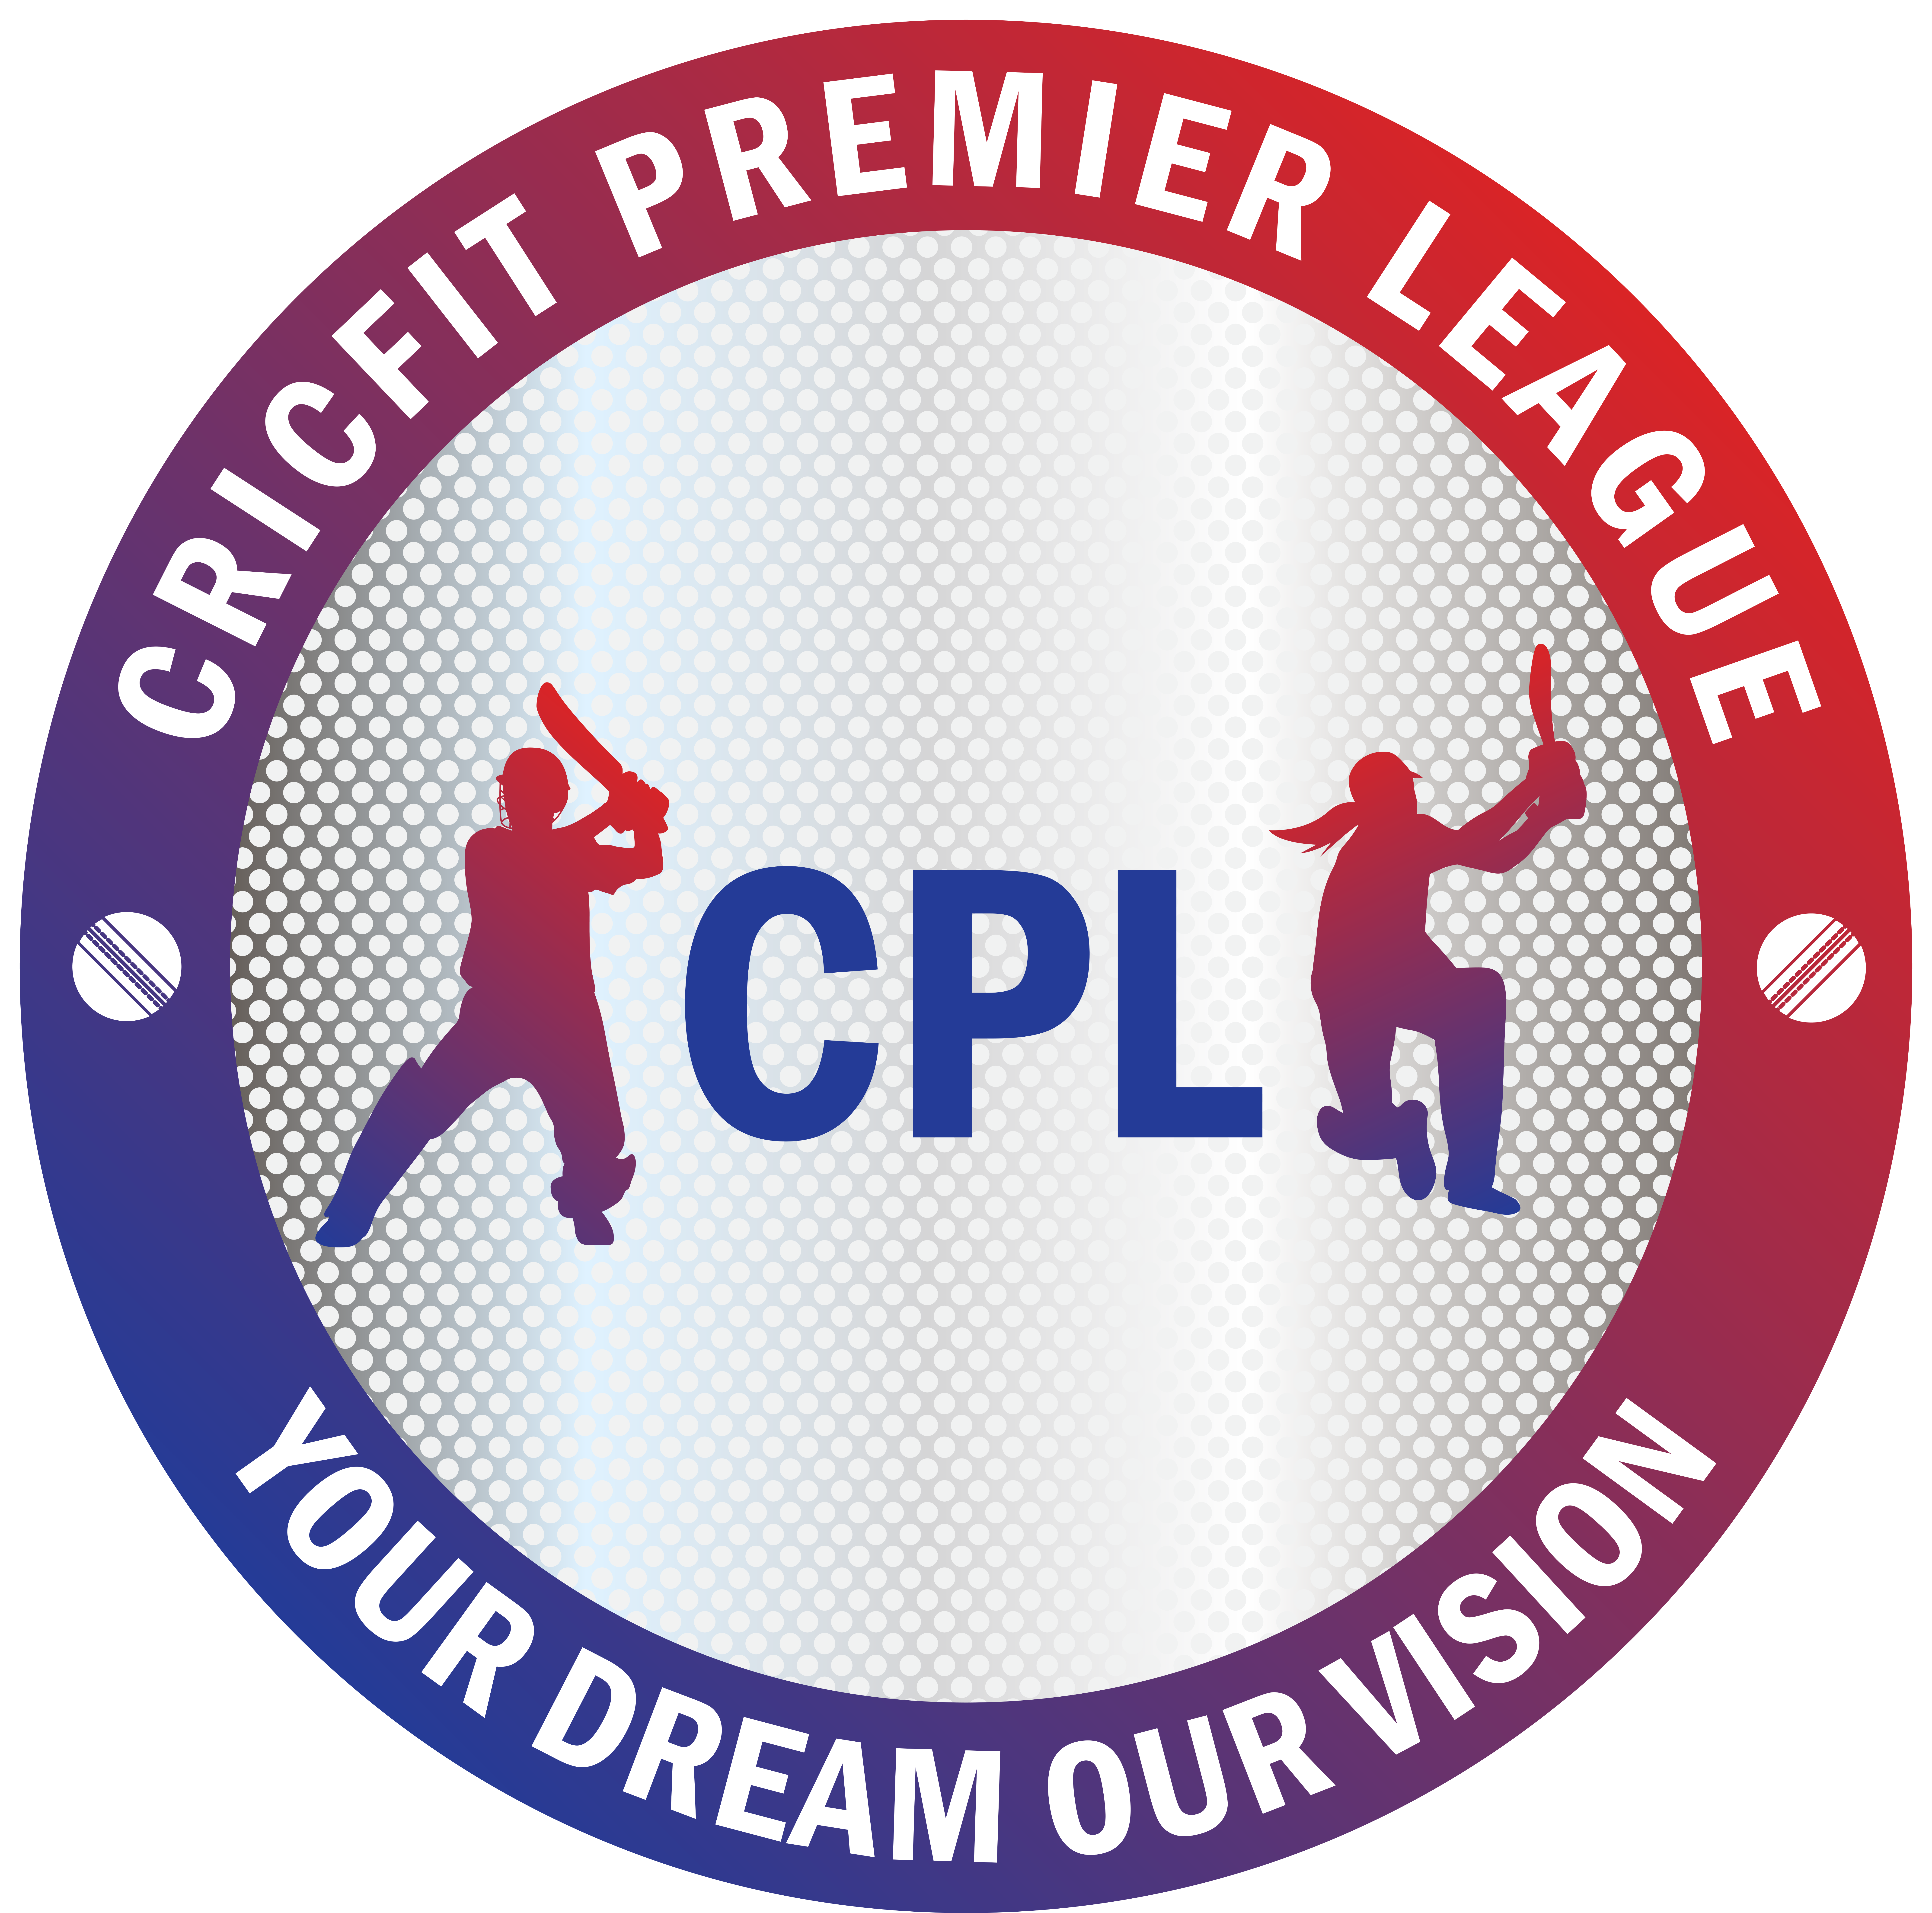 CPL One Day Championship For Junior Cricketers To Begin This November